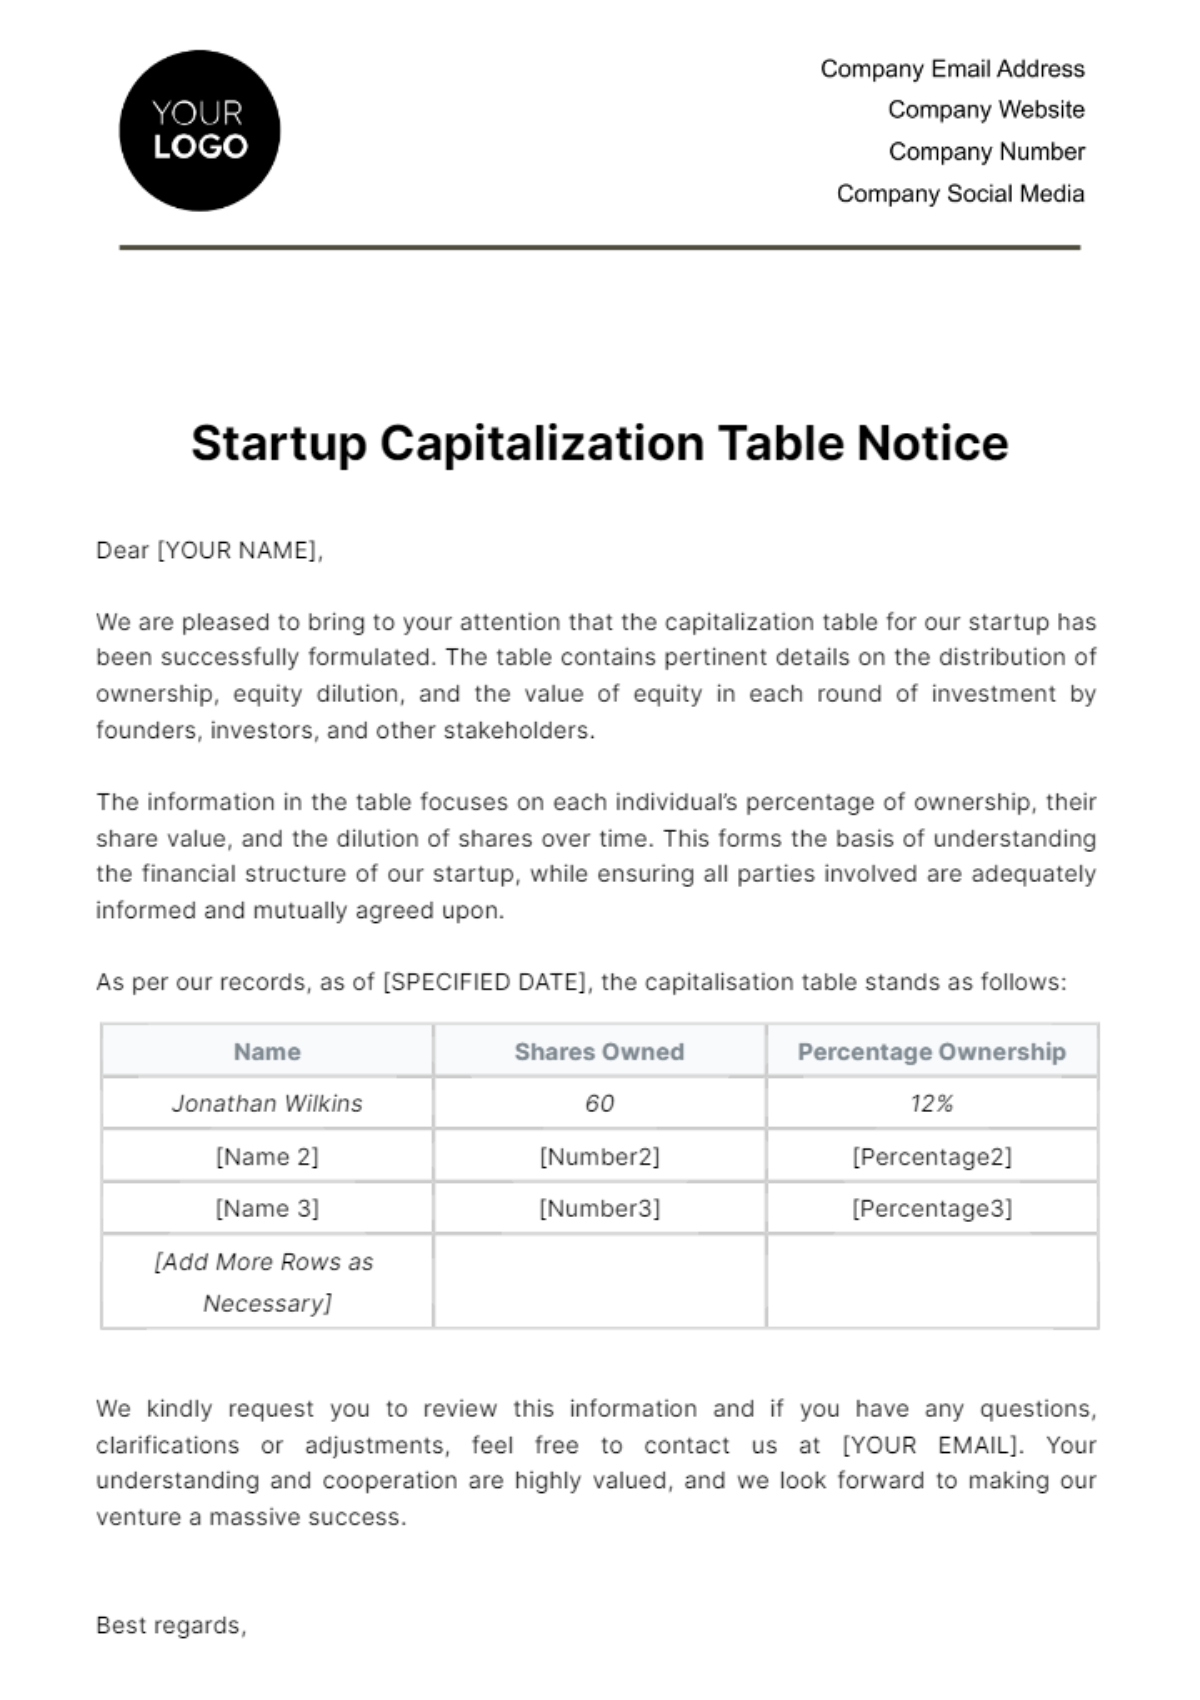 Free Startup Capitalization Table Notice Template